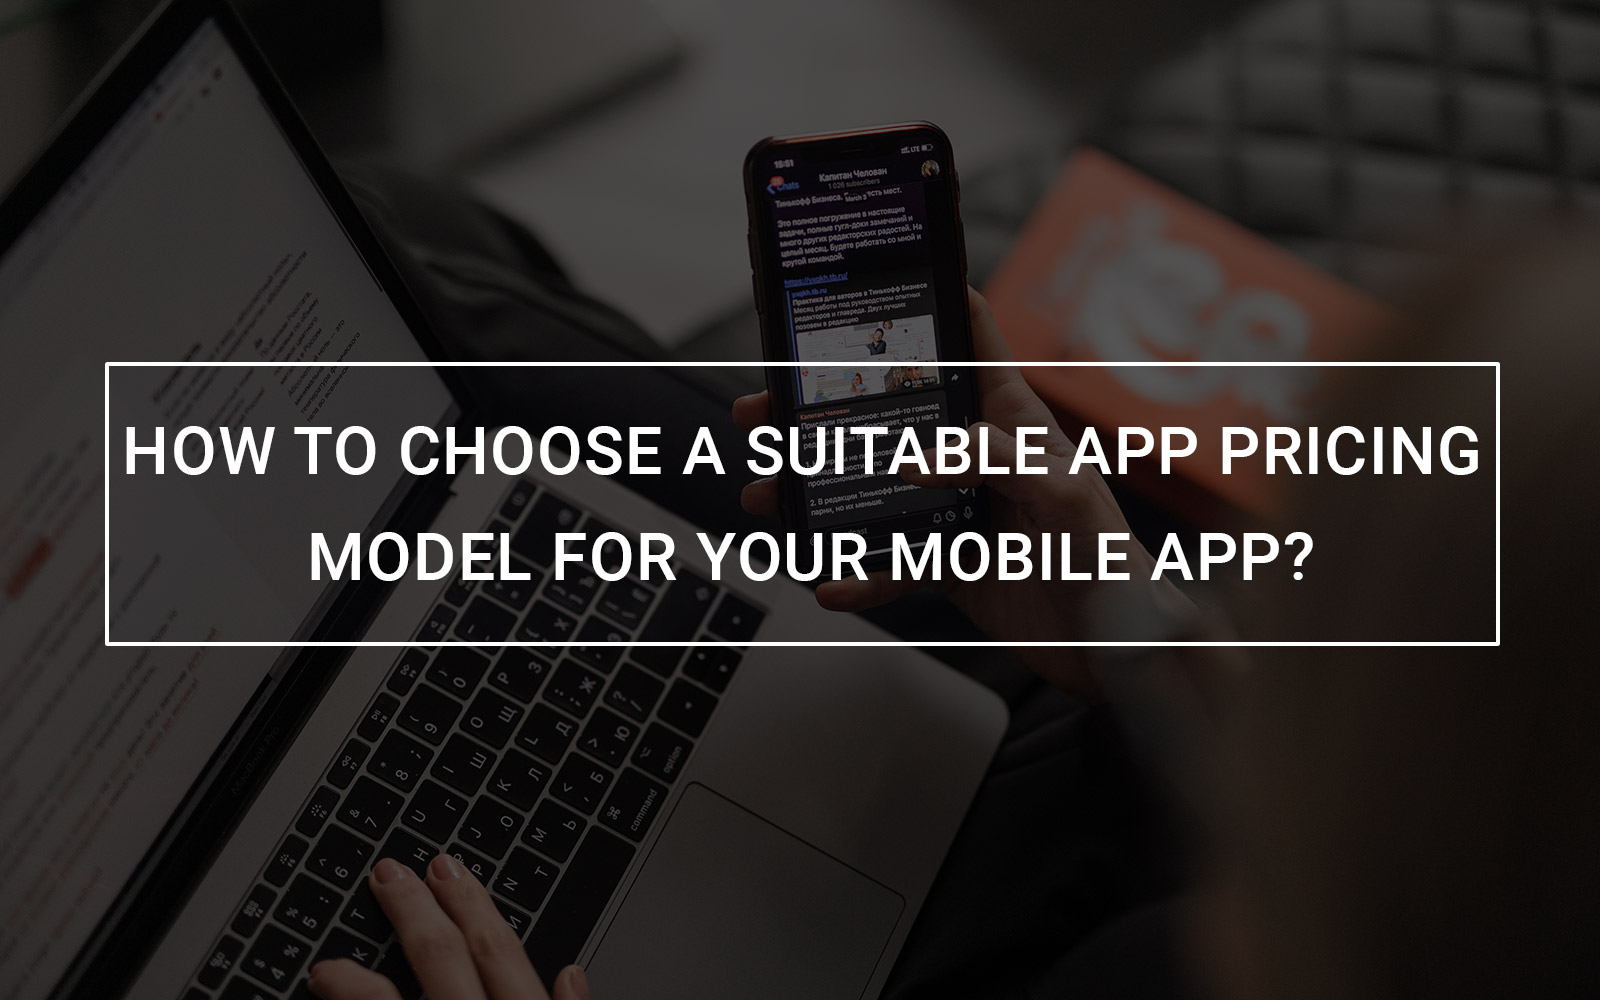 How To Choose a Suitable App Pricing Model for Your Mobile App?